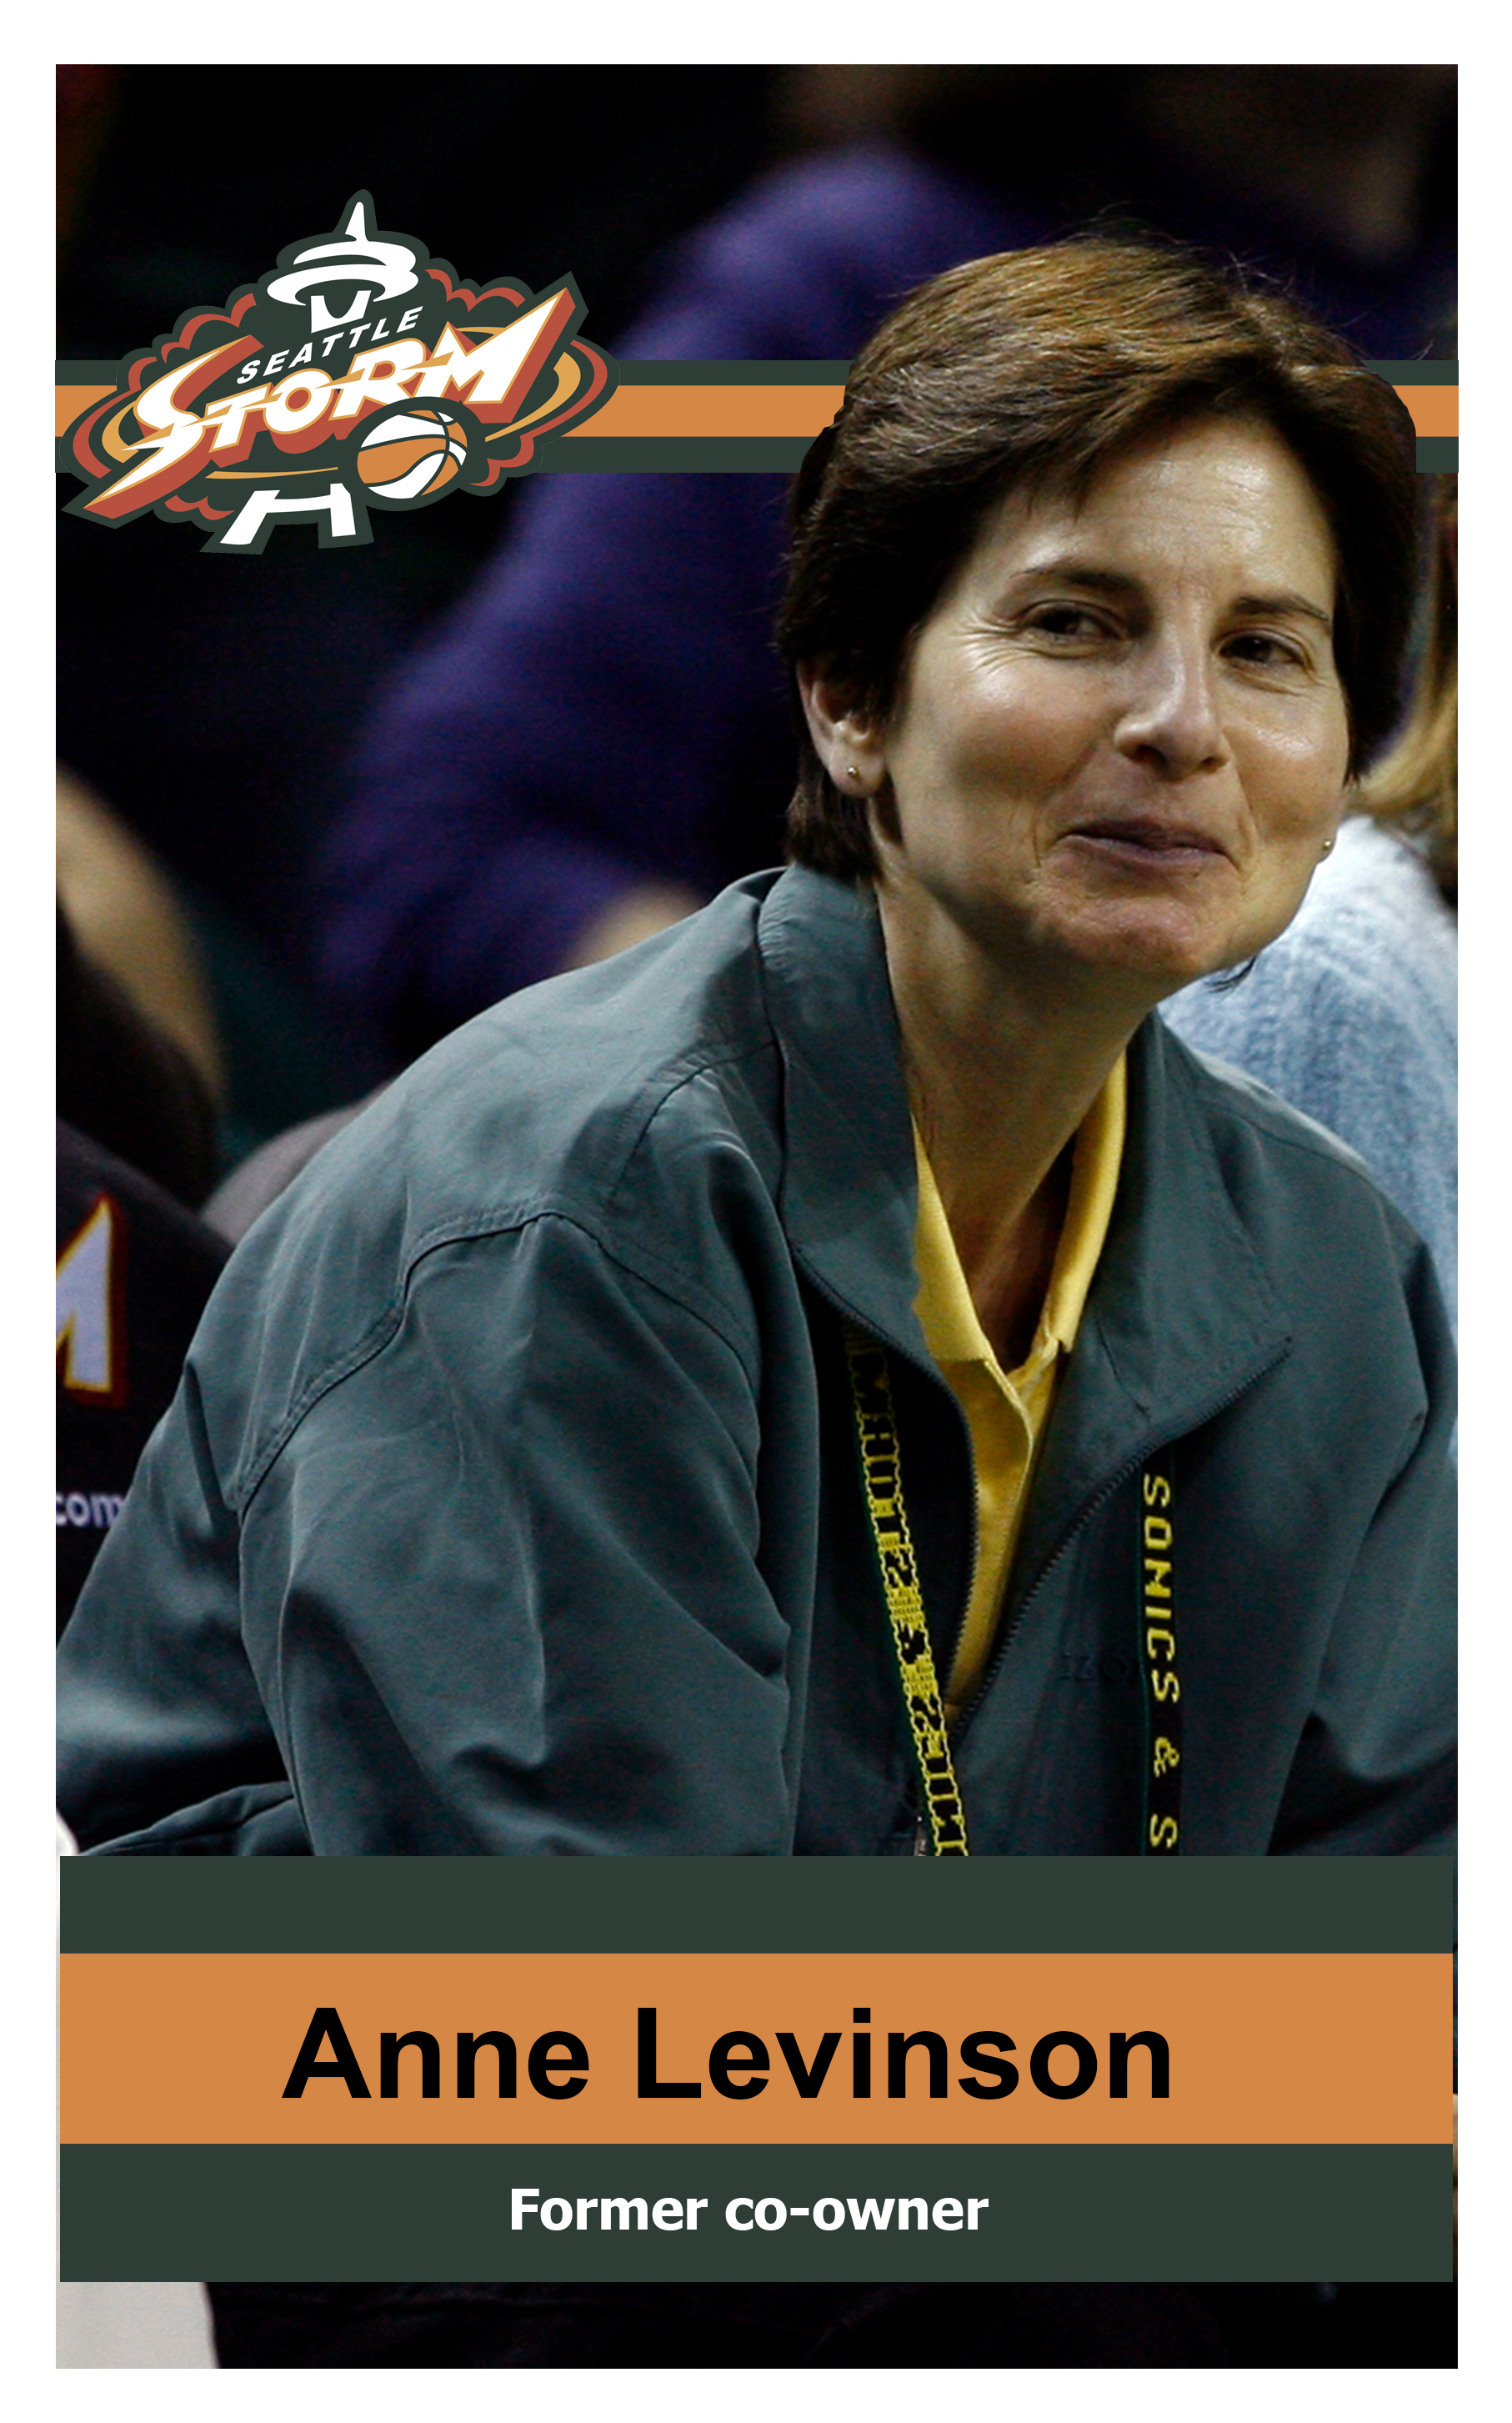 Stylized basketball card of former Storm co-owner Anne Levinson